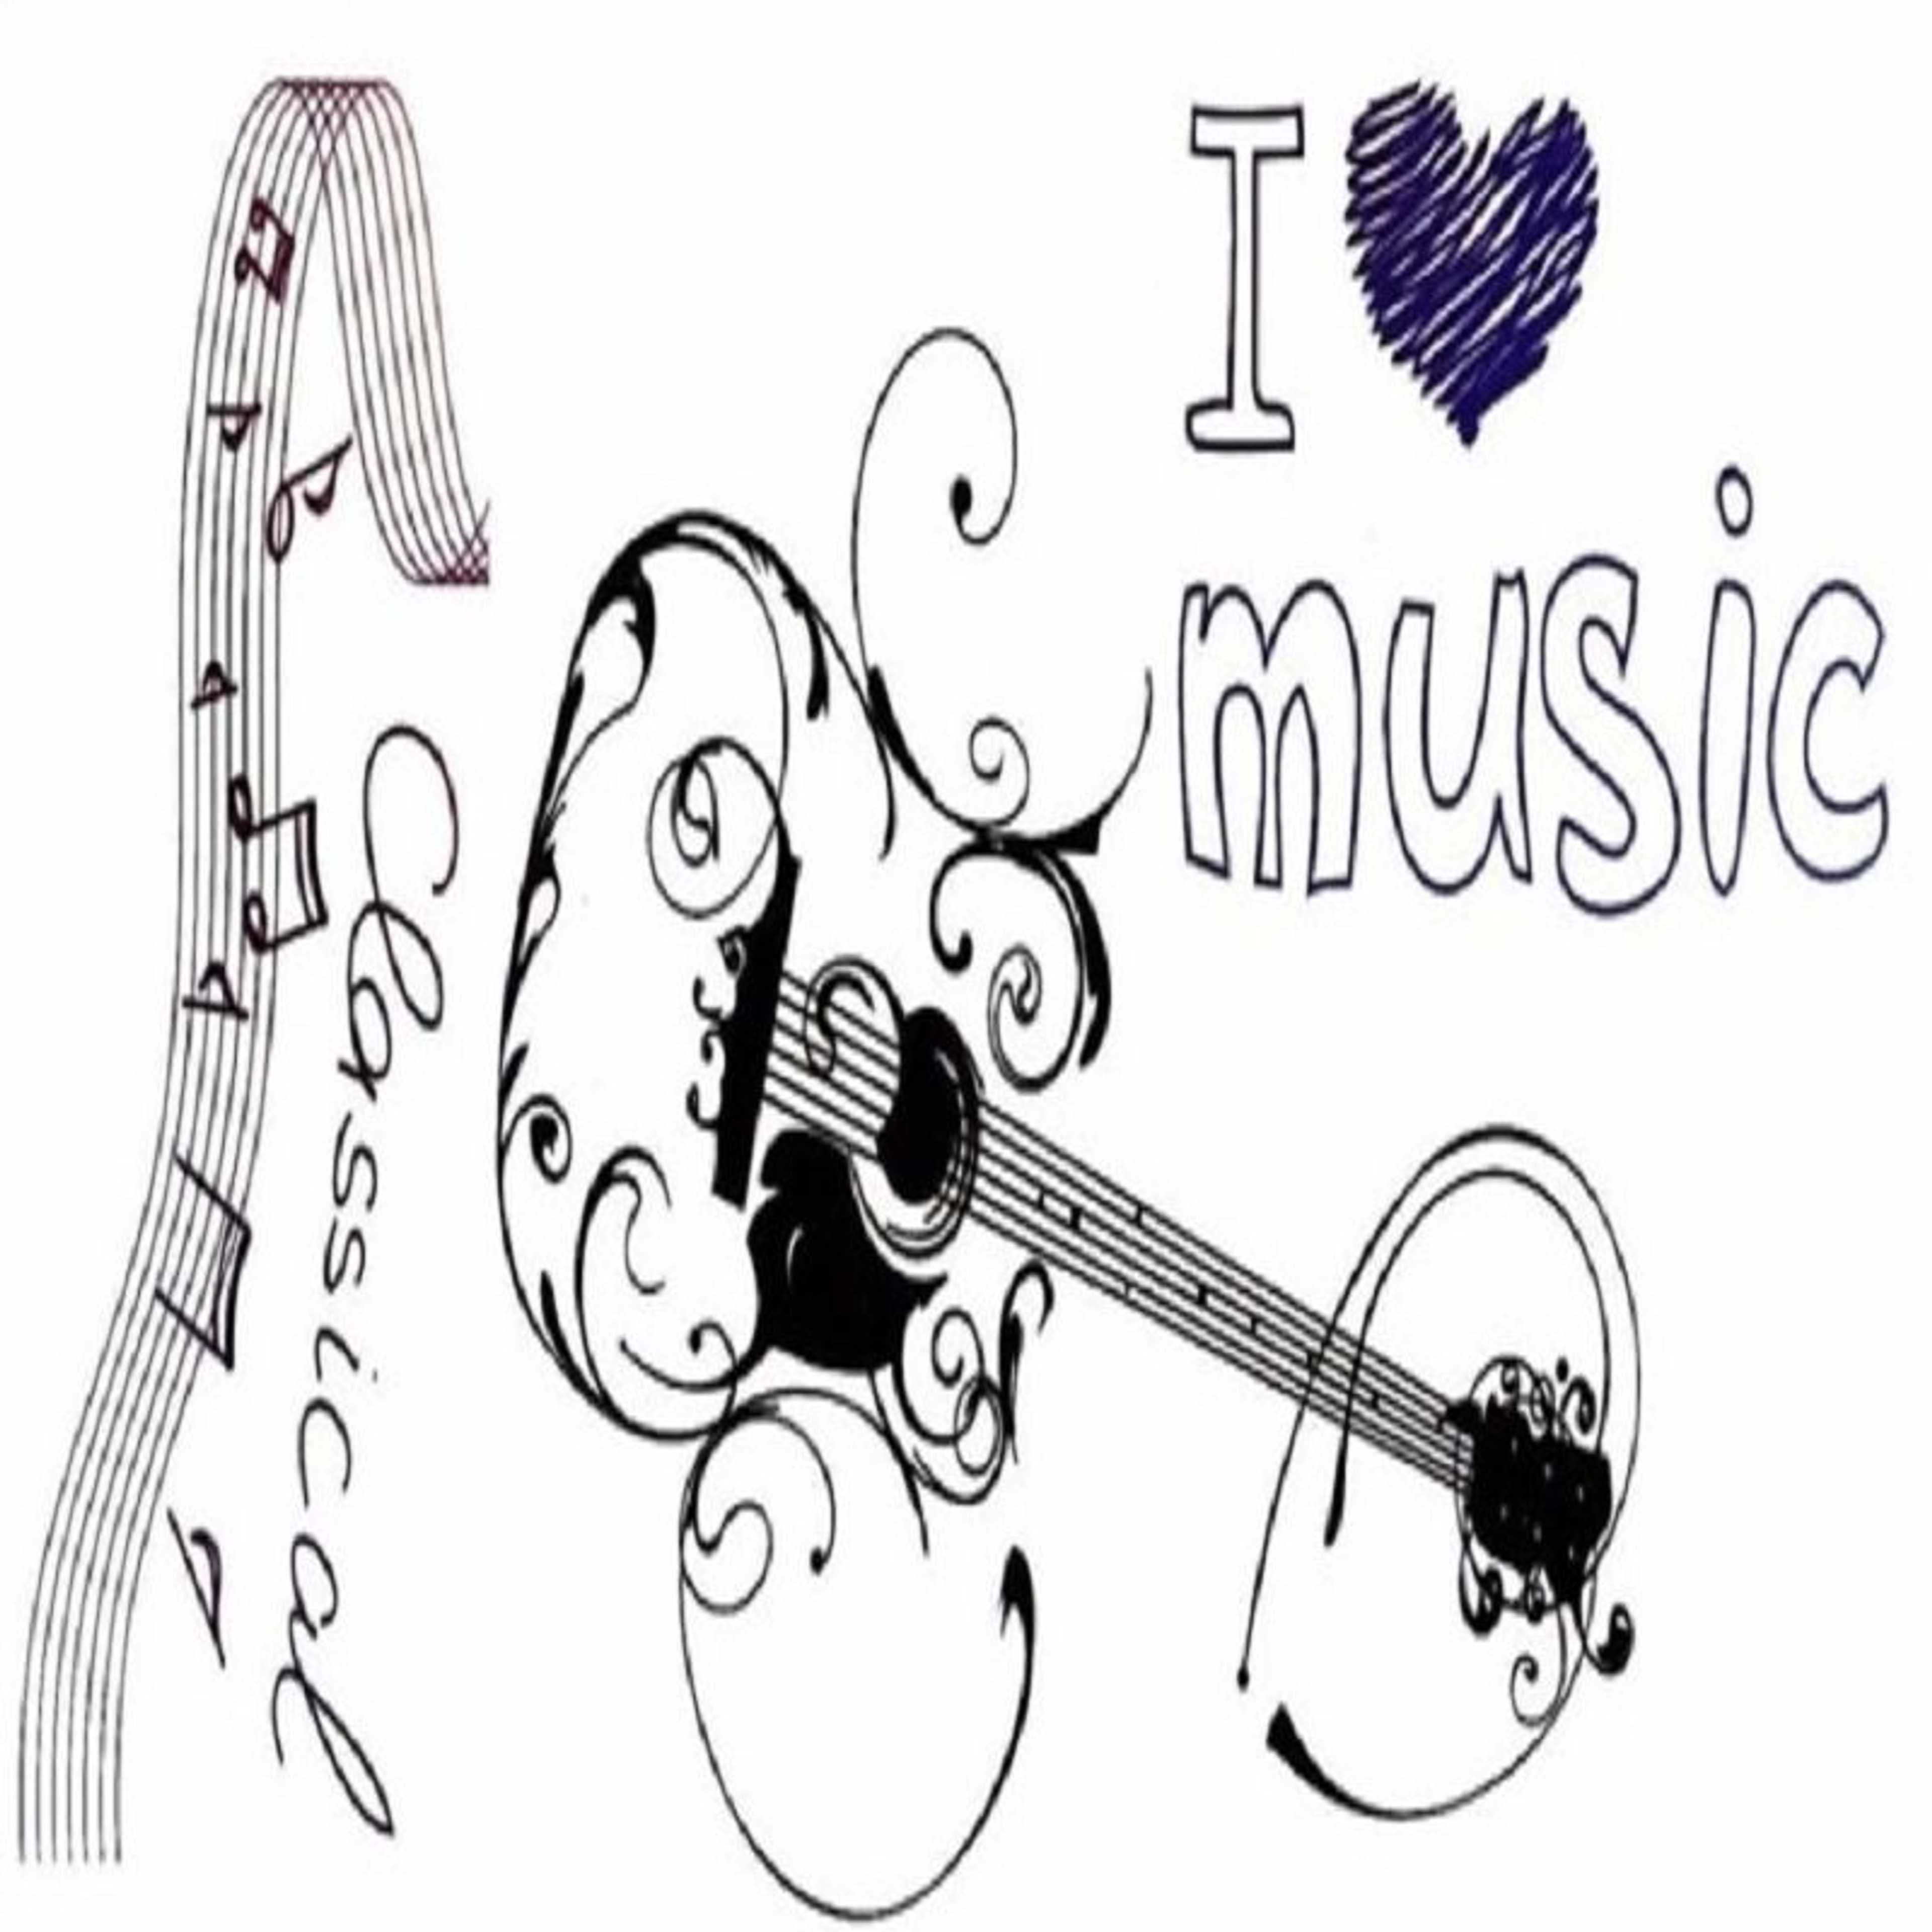 Temporary Tattoo Sticker New Style Guitar and Notes Water Proof Tattoo Body Tattoo